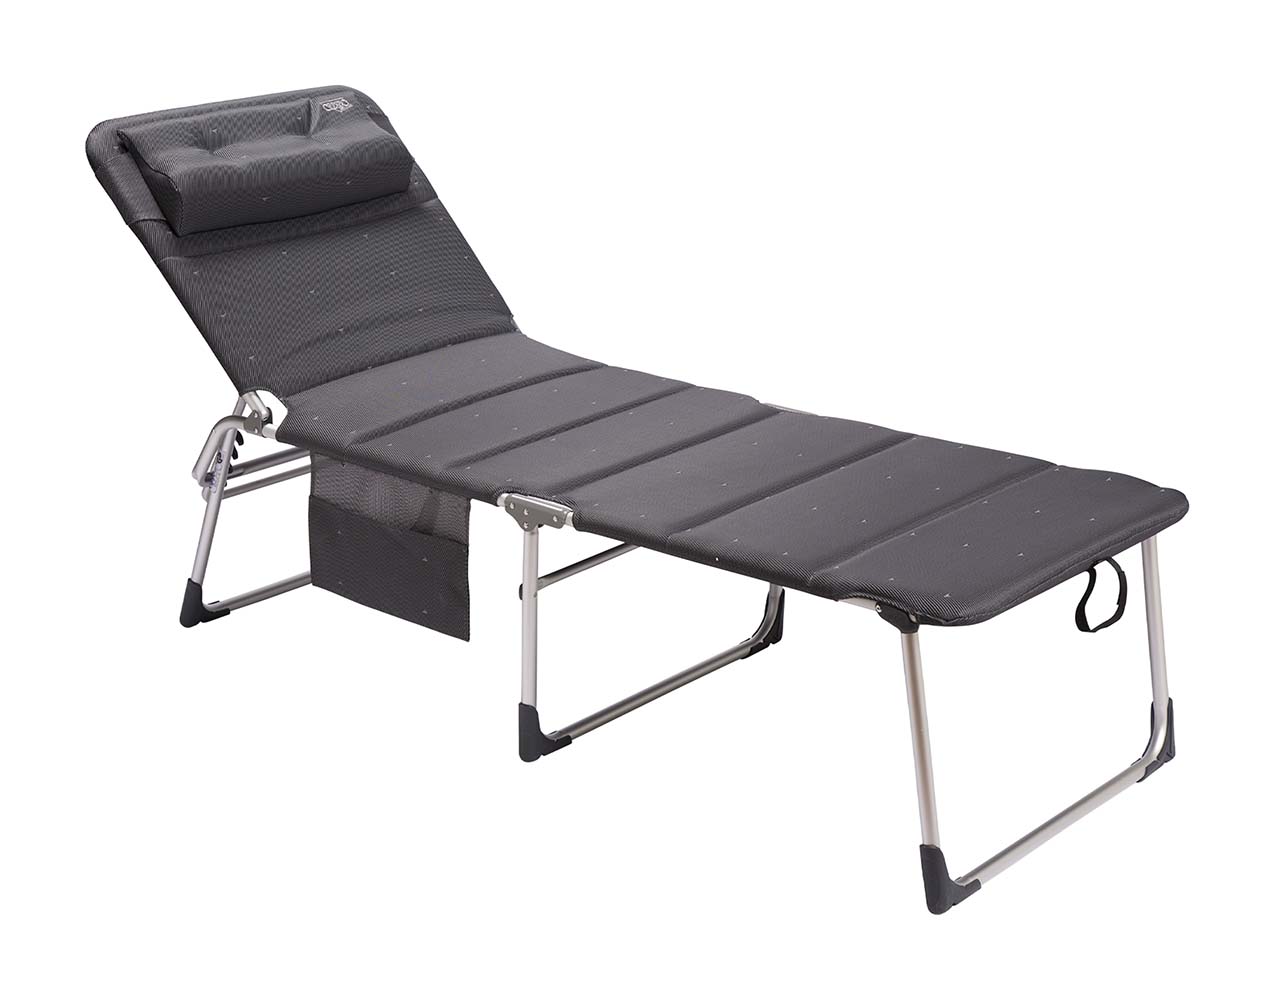 1148269 A comfortable and extra-high sunbed. This bed is fully padded and comes with a headrest for maximum comfort. The padded fabric has an open-cell structure, preventing it from retaining moisture. The backrest of this sunbed is adjustable in 5 positions, and it offers optimal comfort with elastic fastening of the fabric. Additionally, this sunbed is extra wide, extra long, and extra high for easy entry and exit. After use, it can be folded flat for convenient storage.